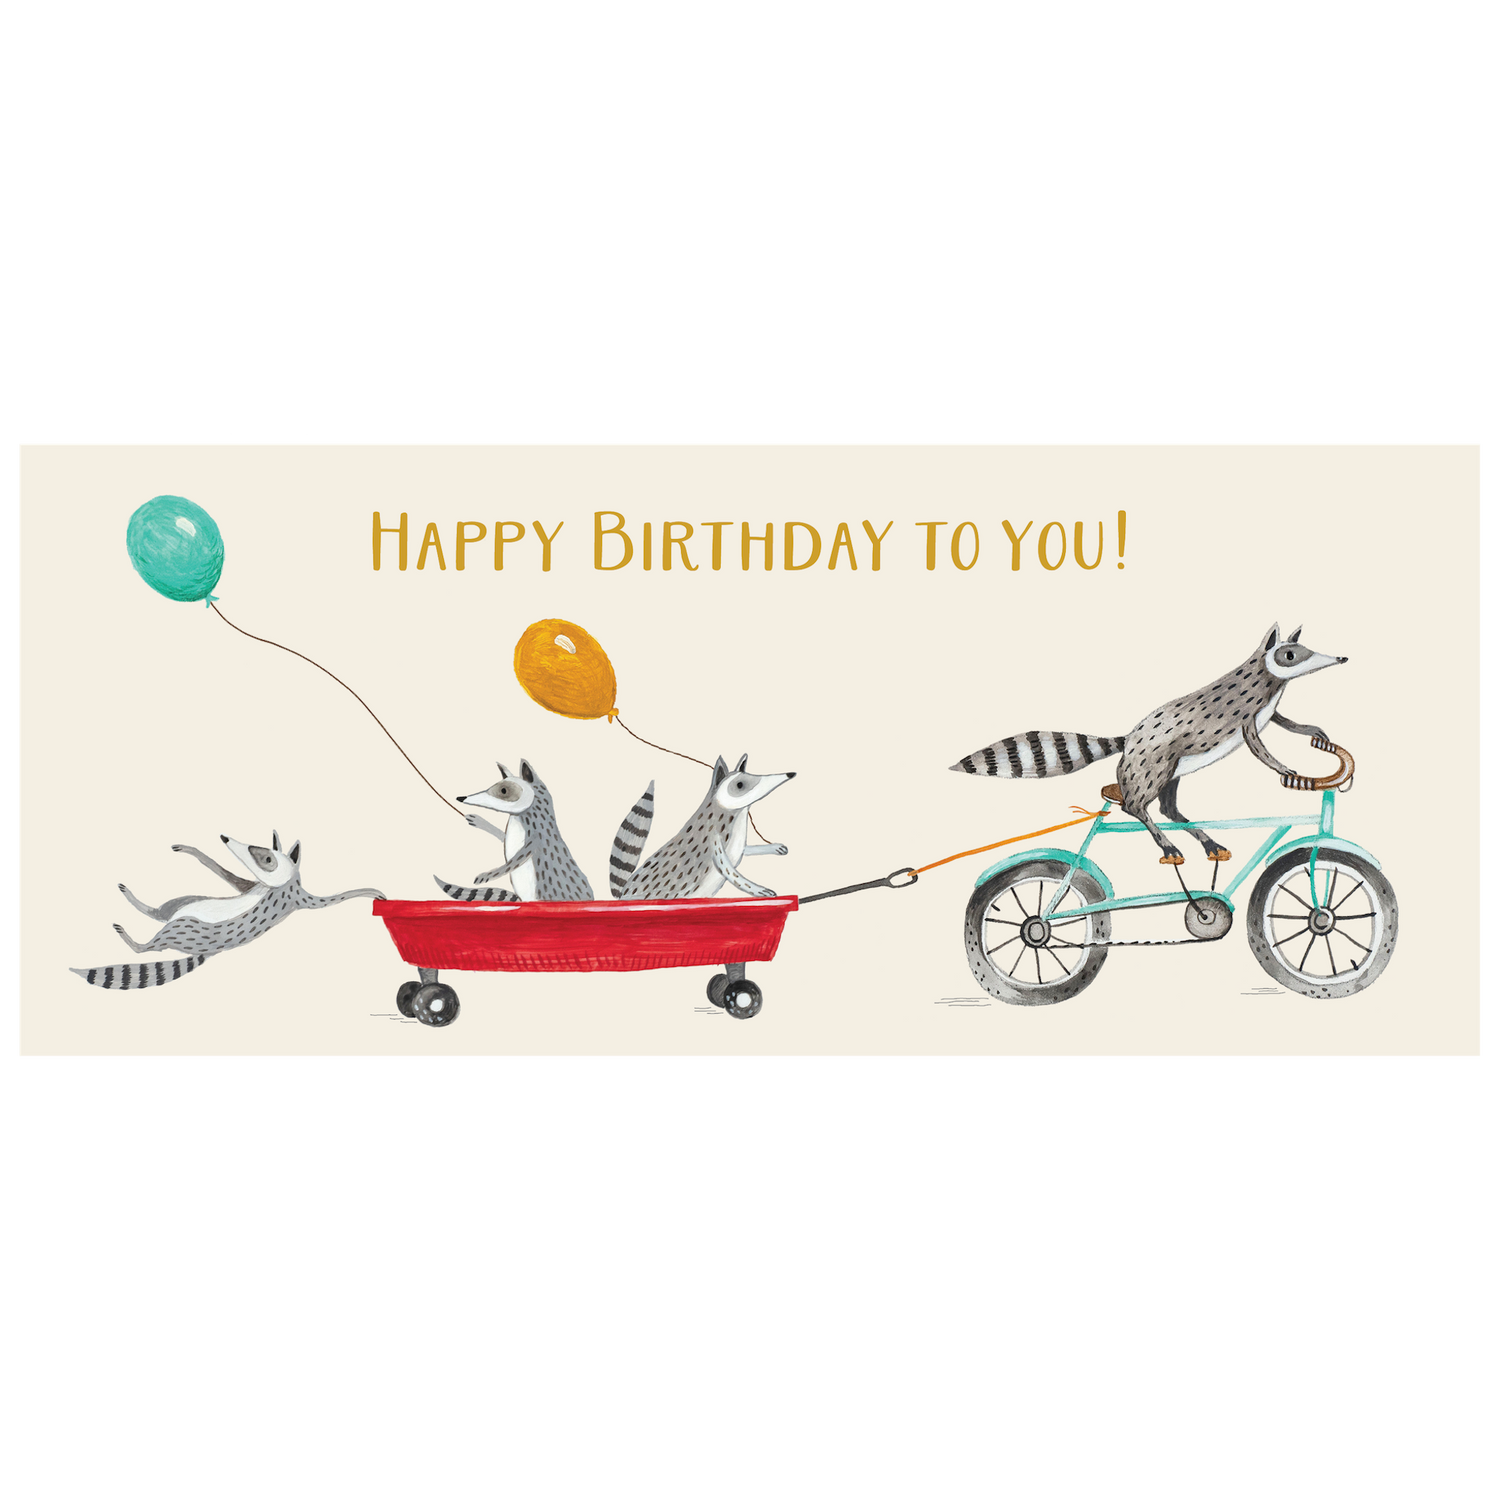 A whimsical illustration of four raccoons zooming by: one is pedaling a teal bicycle, with two holding balloons in a red wagon pulled behind the bike, and the last one hanging on to the wagon, over a cream background, with &quot;Happy Birthday To You!&quot; written in gold across the top of the card.